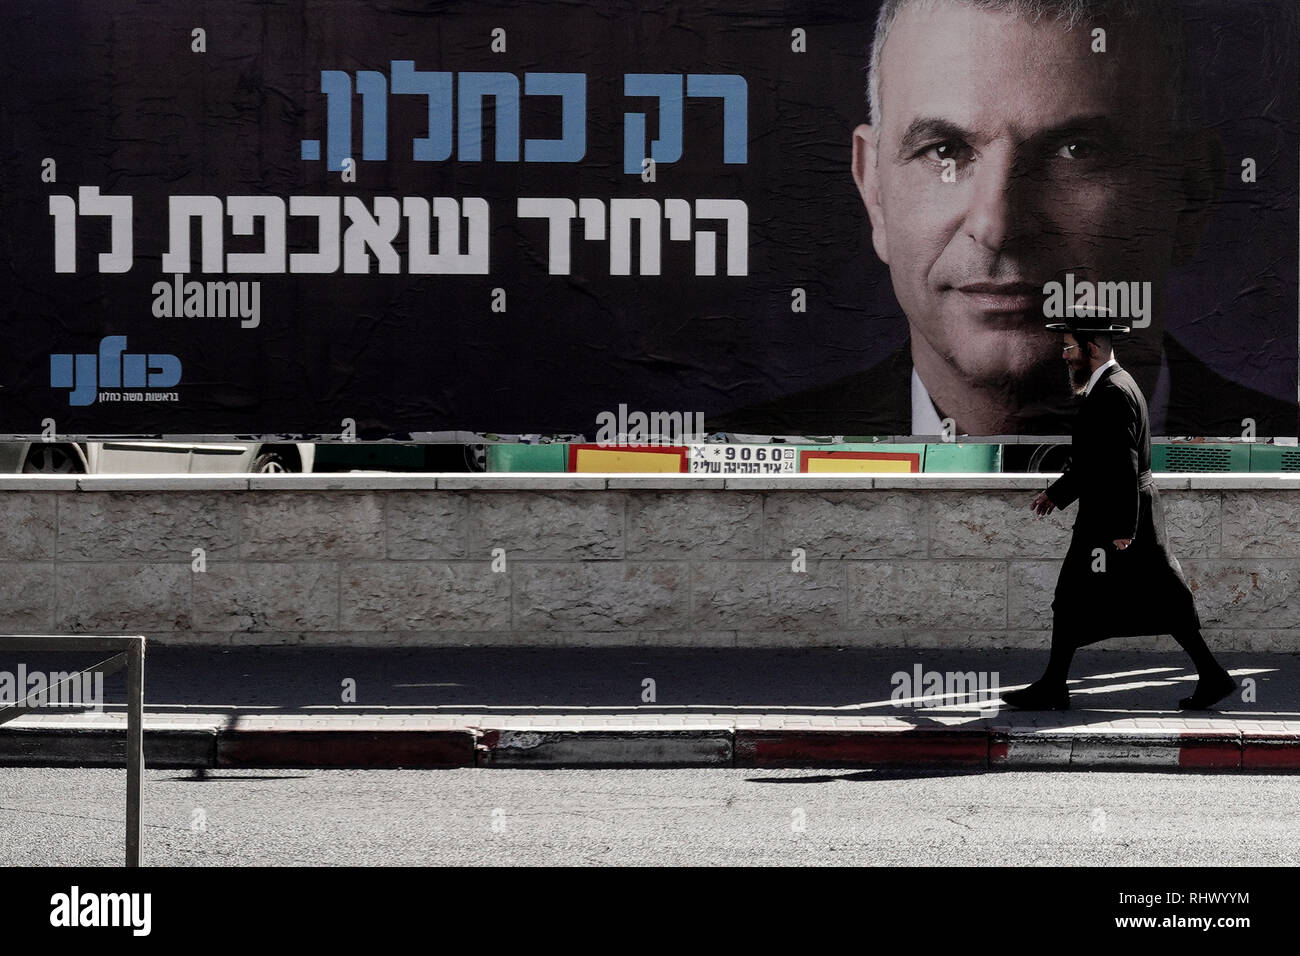 Jerusalem, Israel. 4th February, 2019. An ultra Orthodox Jewish man walks past banners depicting Incumbent Minister of Finance Kahlon, head of the Kulanu party, as part of his national elections campaign ahead of 9th April, 2019, elections. Credit: Nir Alon/Alamy Live News Stock Photo